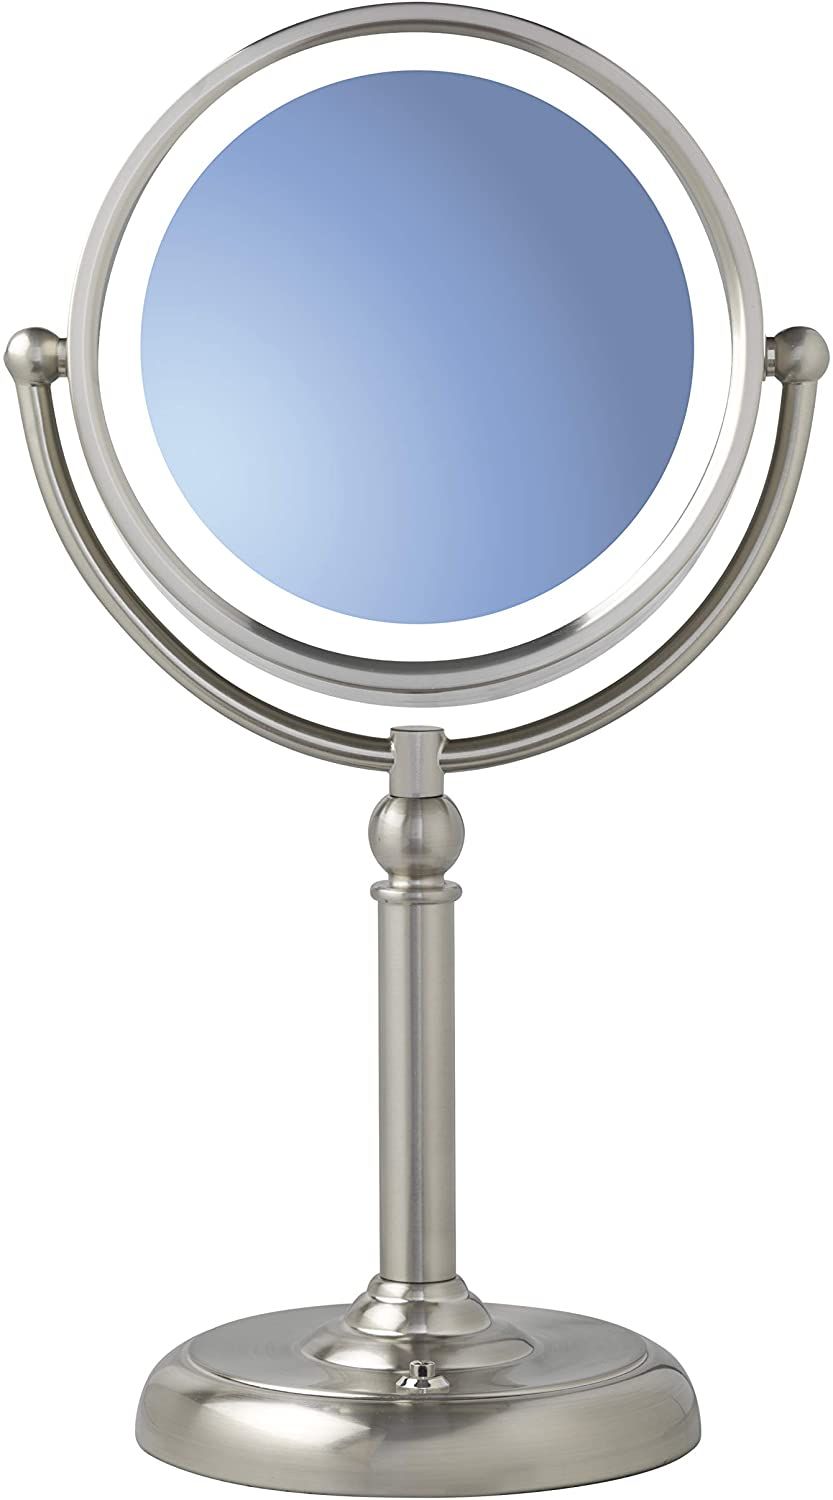 Sunter Led Vanity Mirror Brushed Nickel, Two Sided 1x/10x Magnification Regarding Single Sided Polished Nickel Wall Mirrors (View 10 of 15)